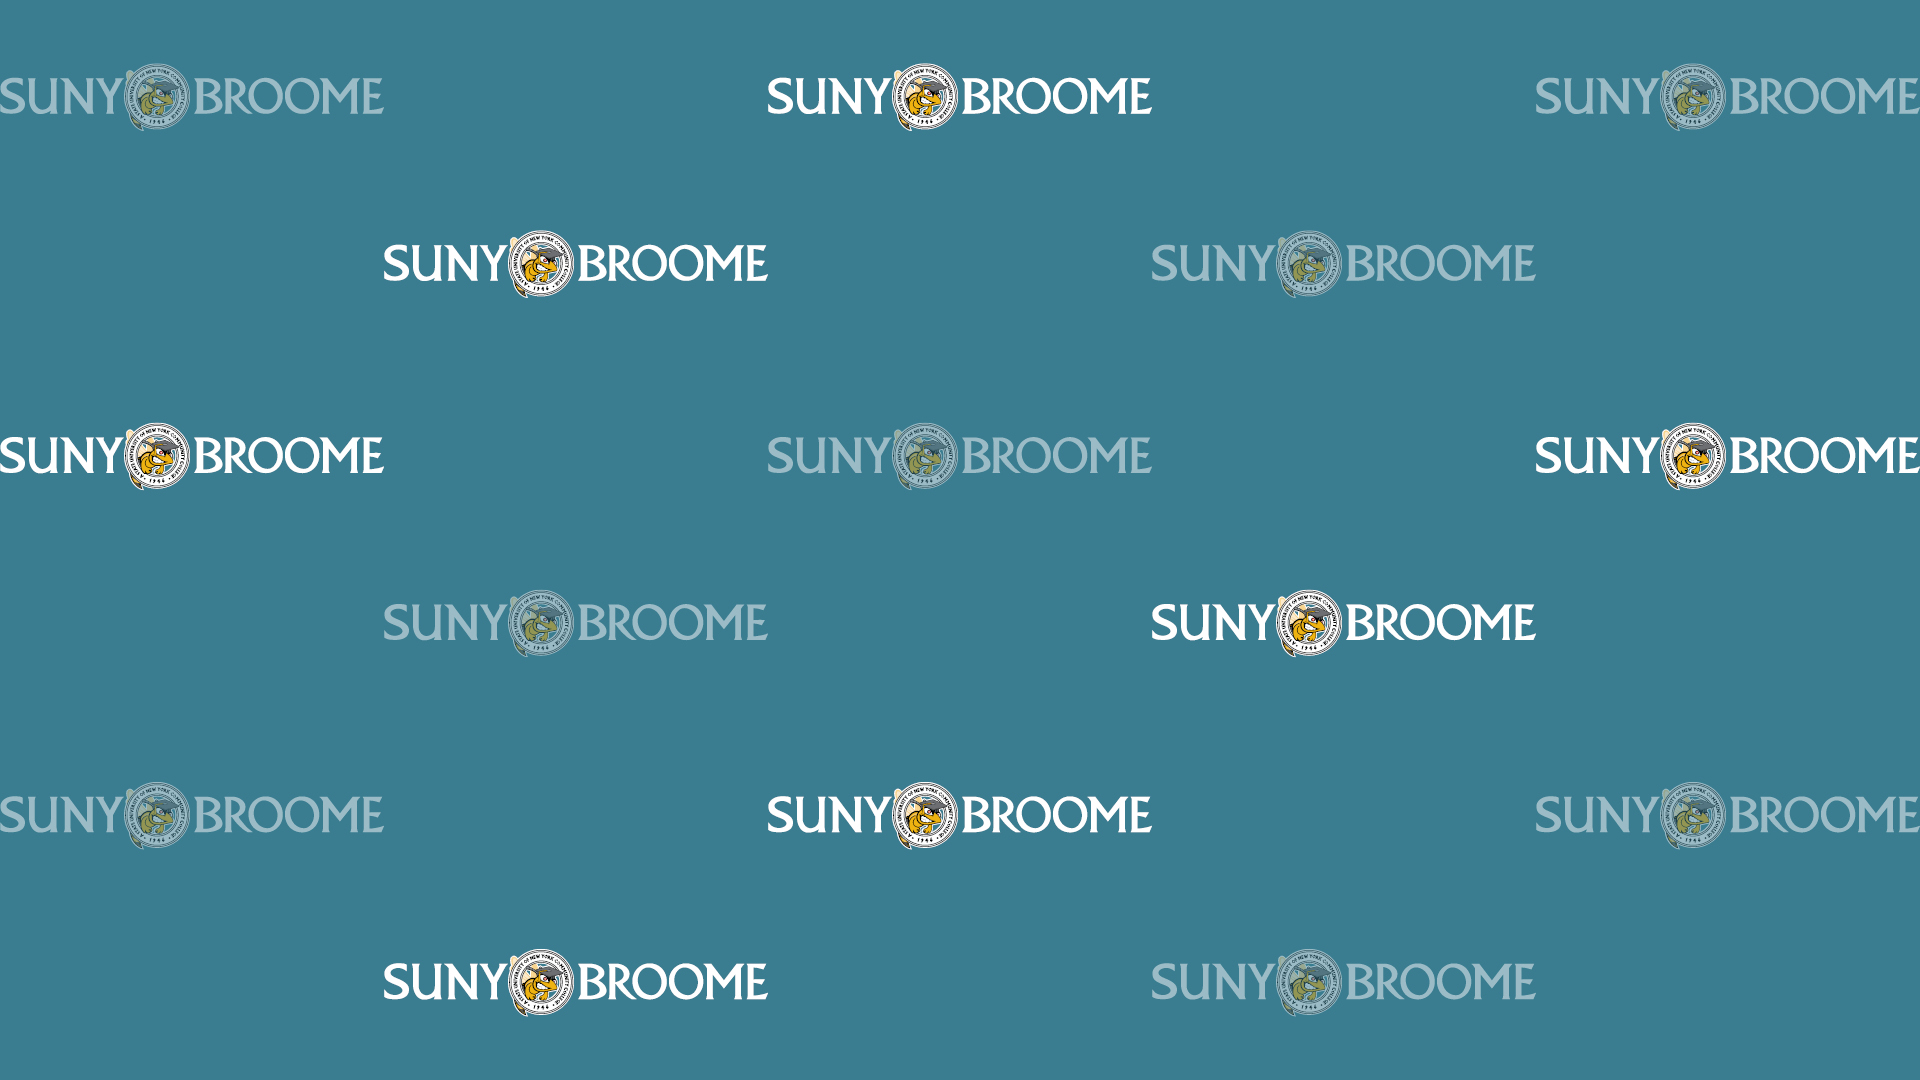 Download Zoom virtual background with white SUNY Broome logo tiled on blue background (jpg)